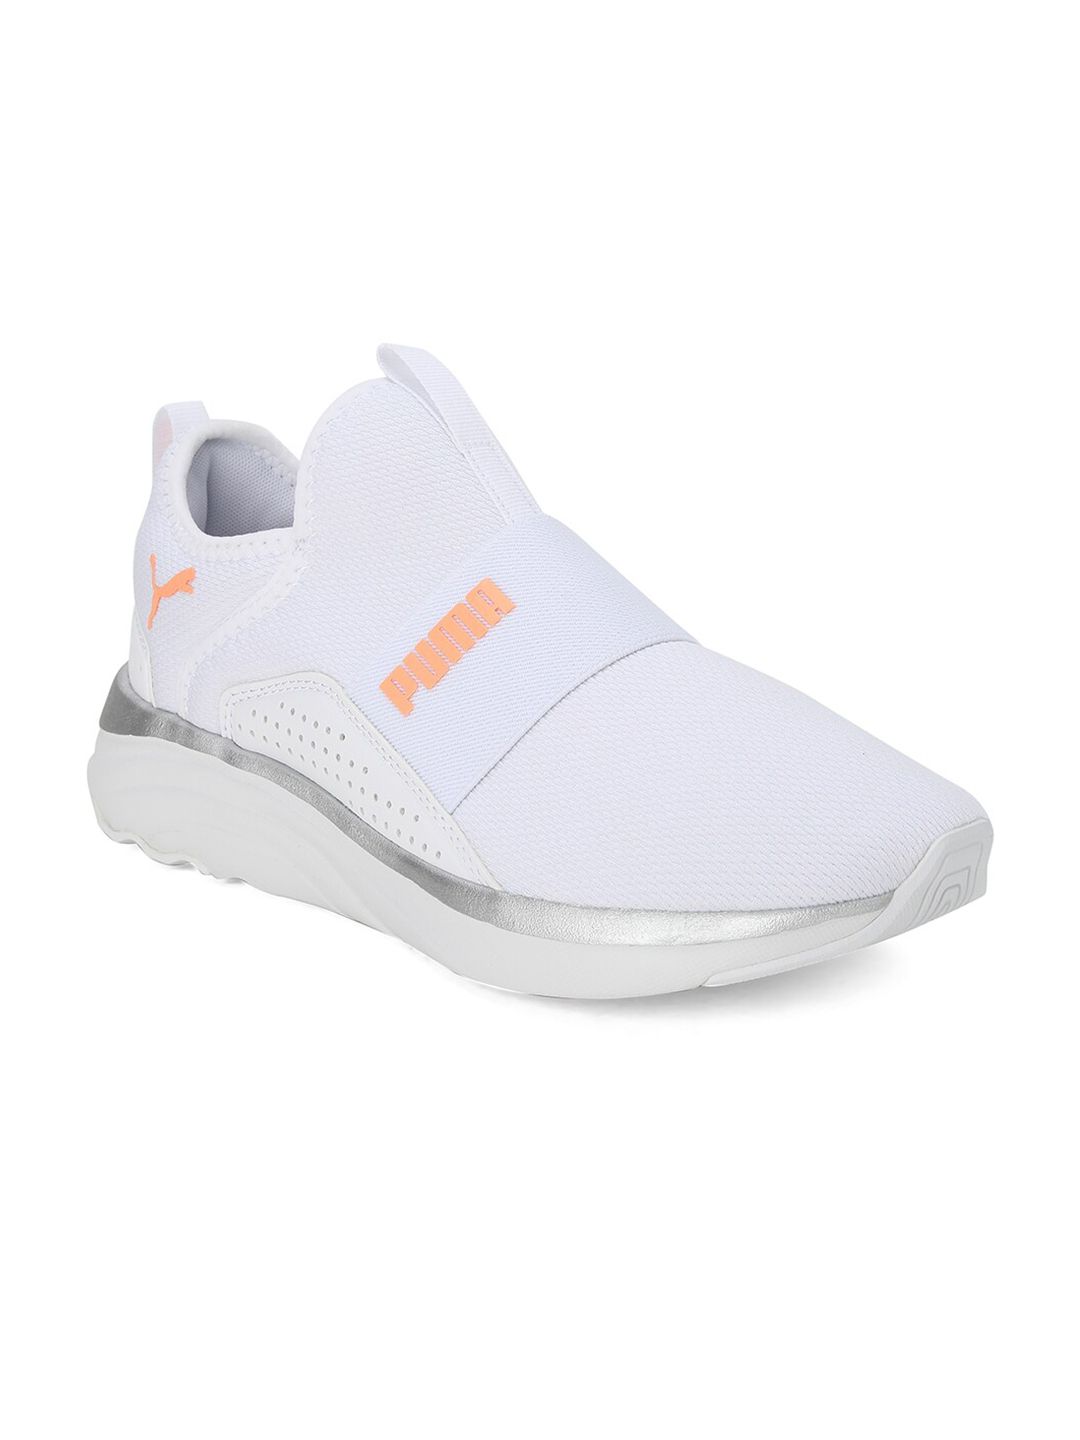 Puma Women White Sports Shoes Price in India